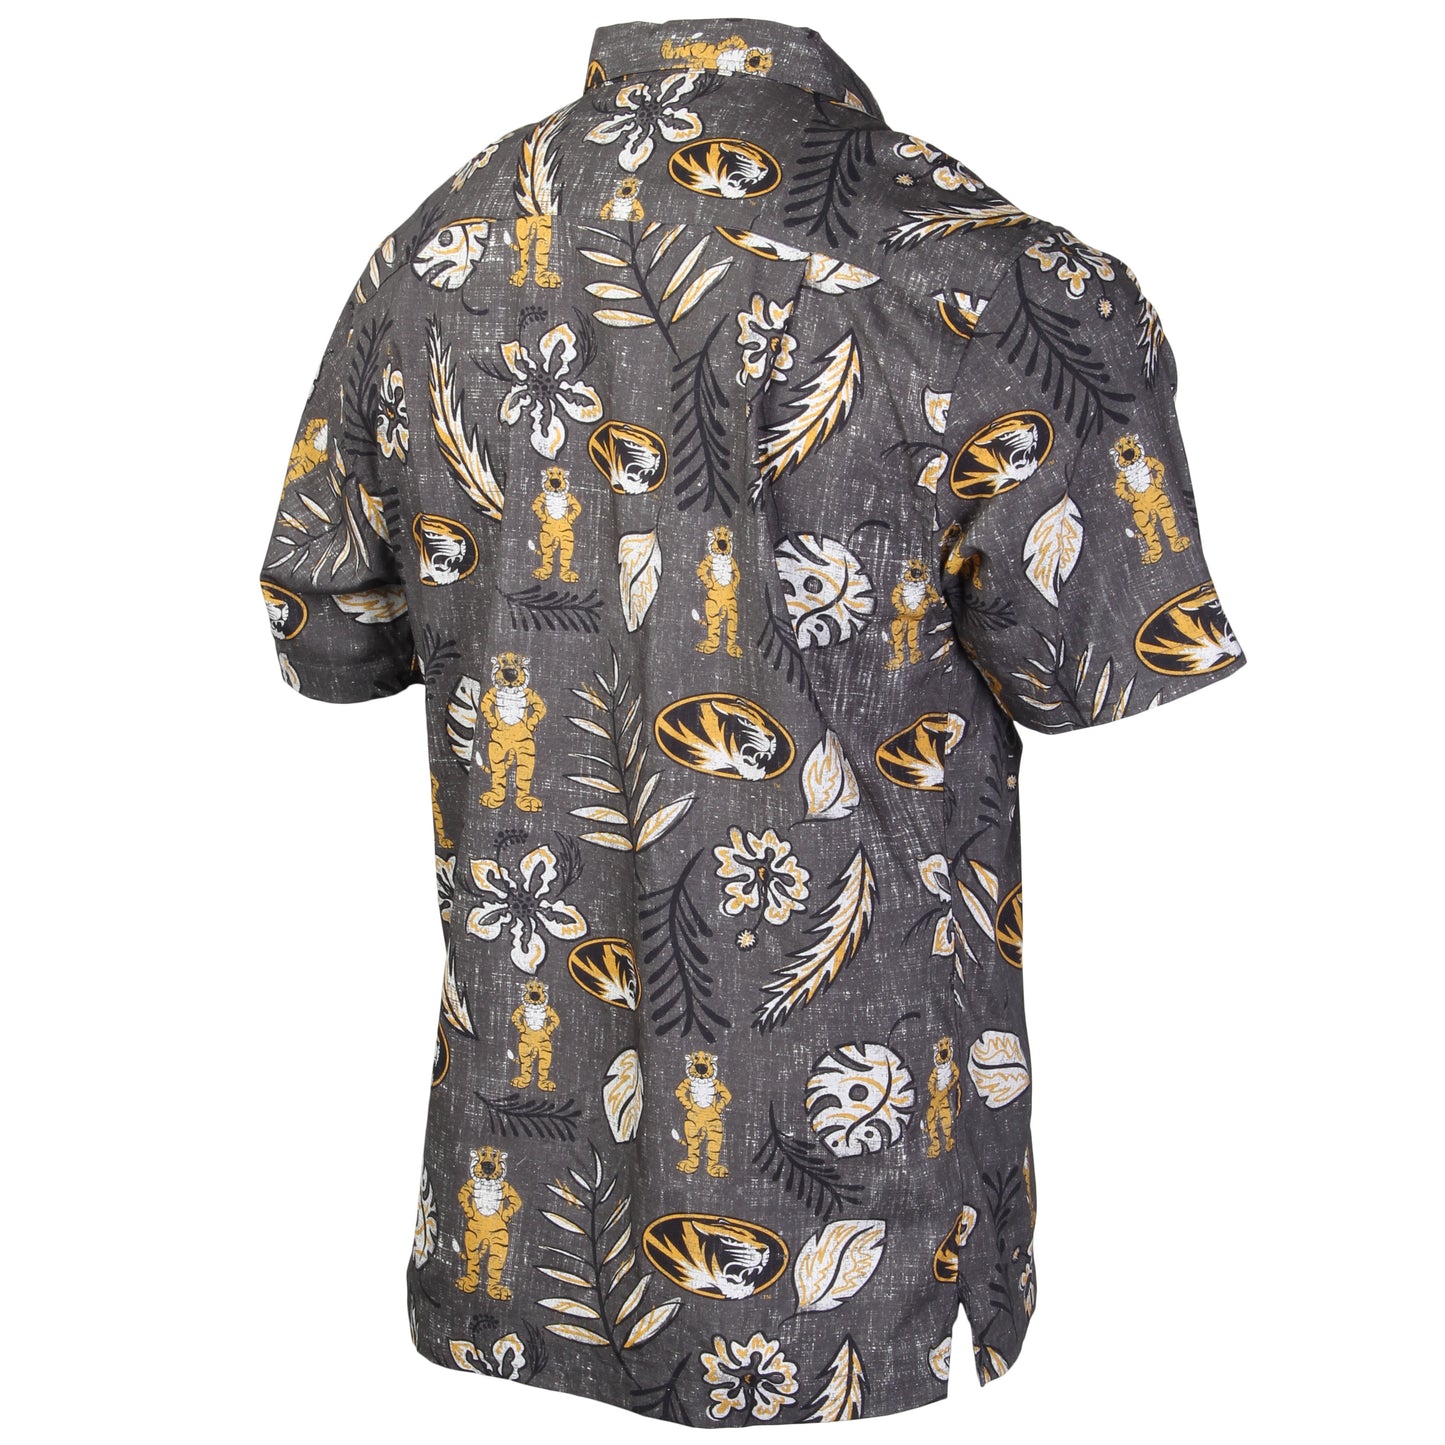 Missouri Tigers Wes and Willy Mens College Hawaiian Short Sleeve Button Down Shirt Vintage Floral